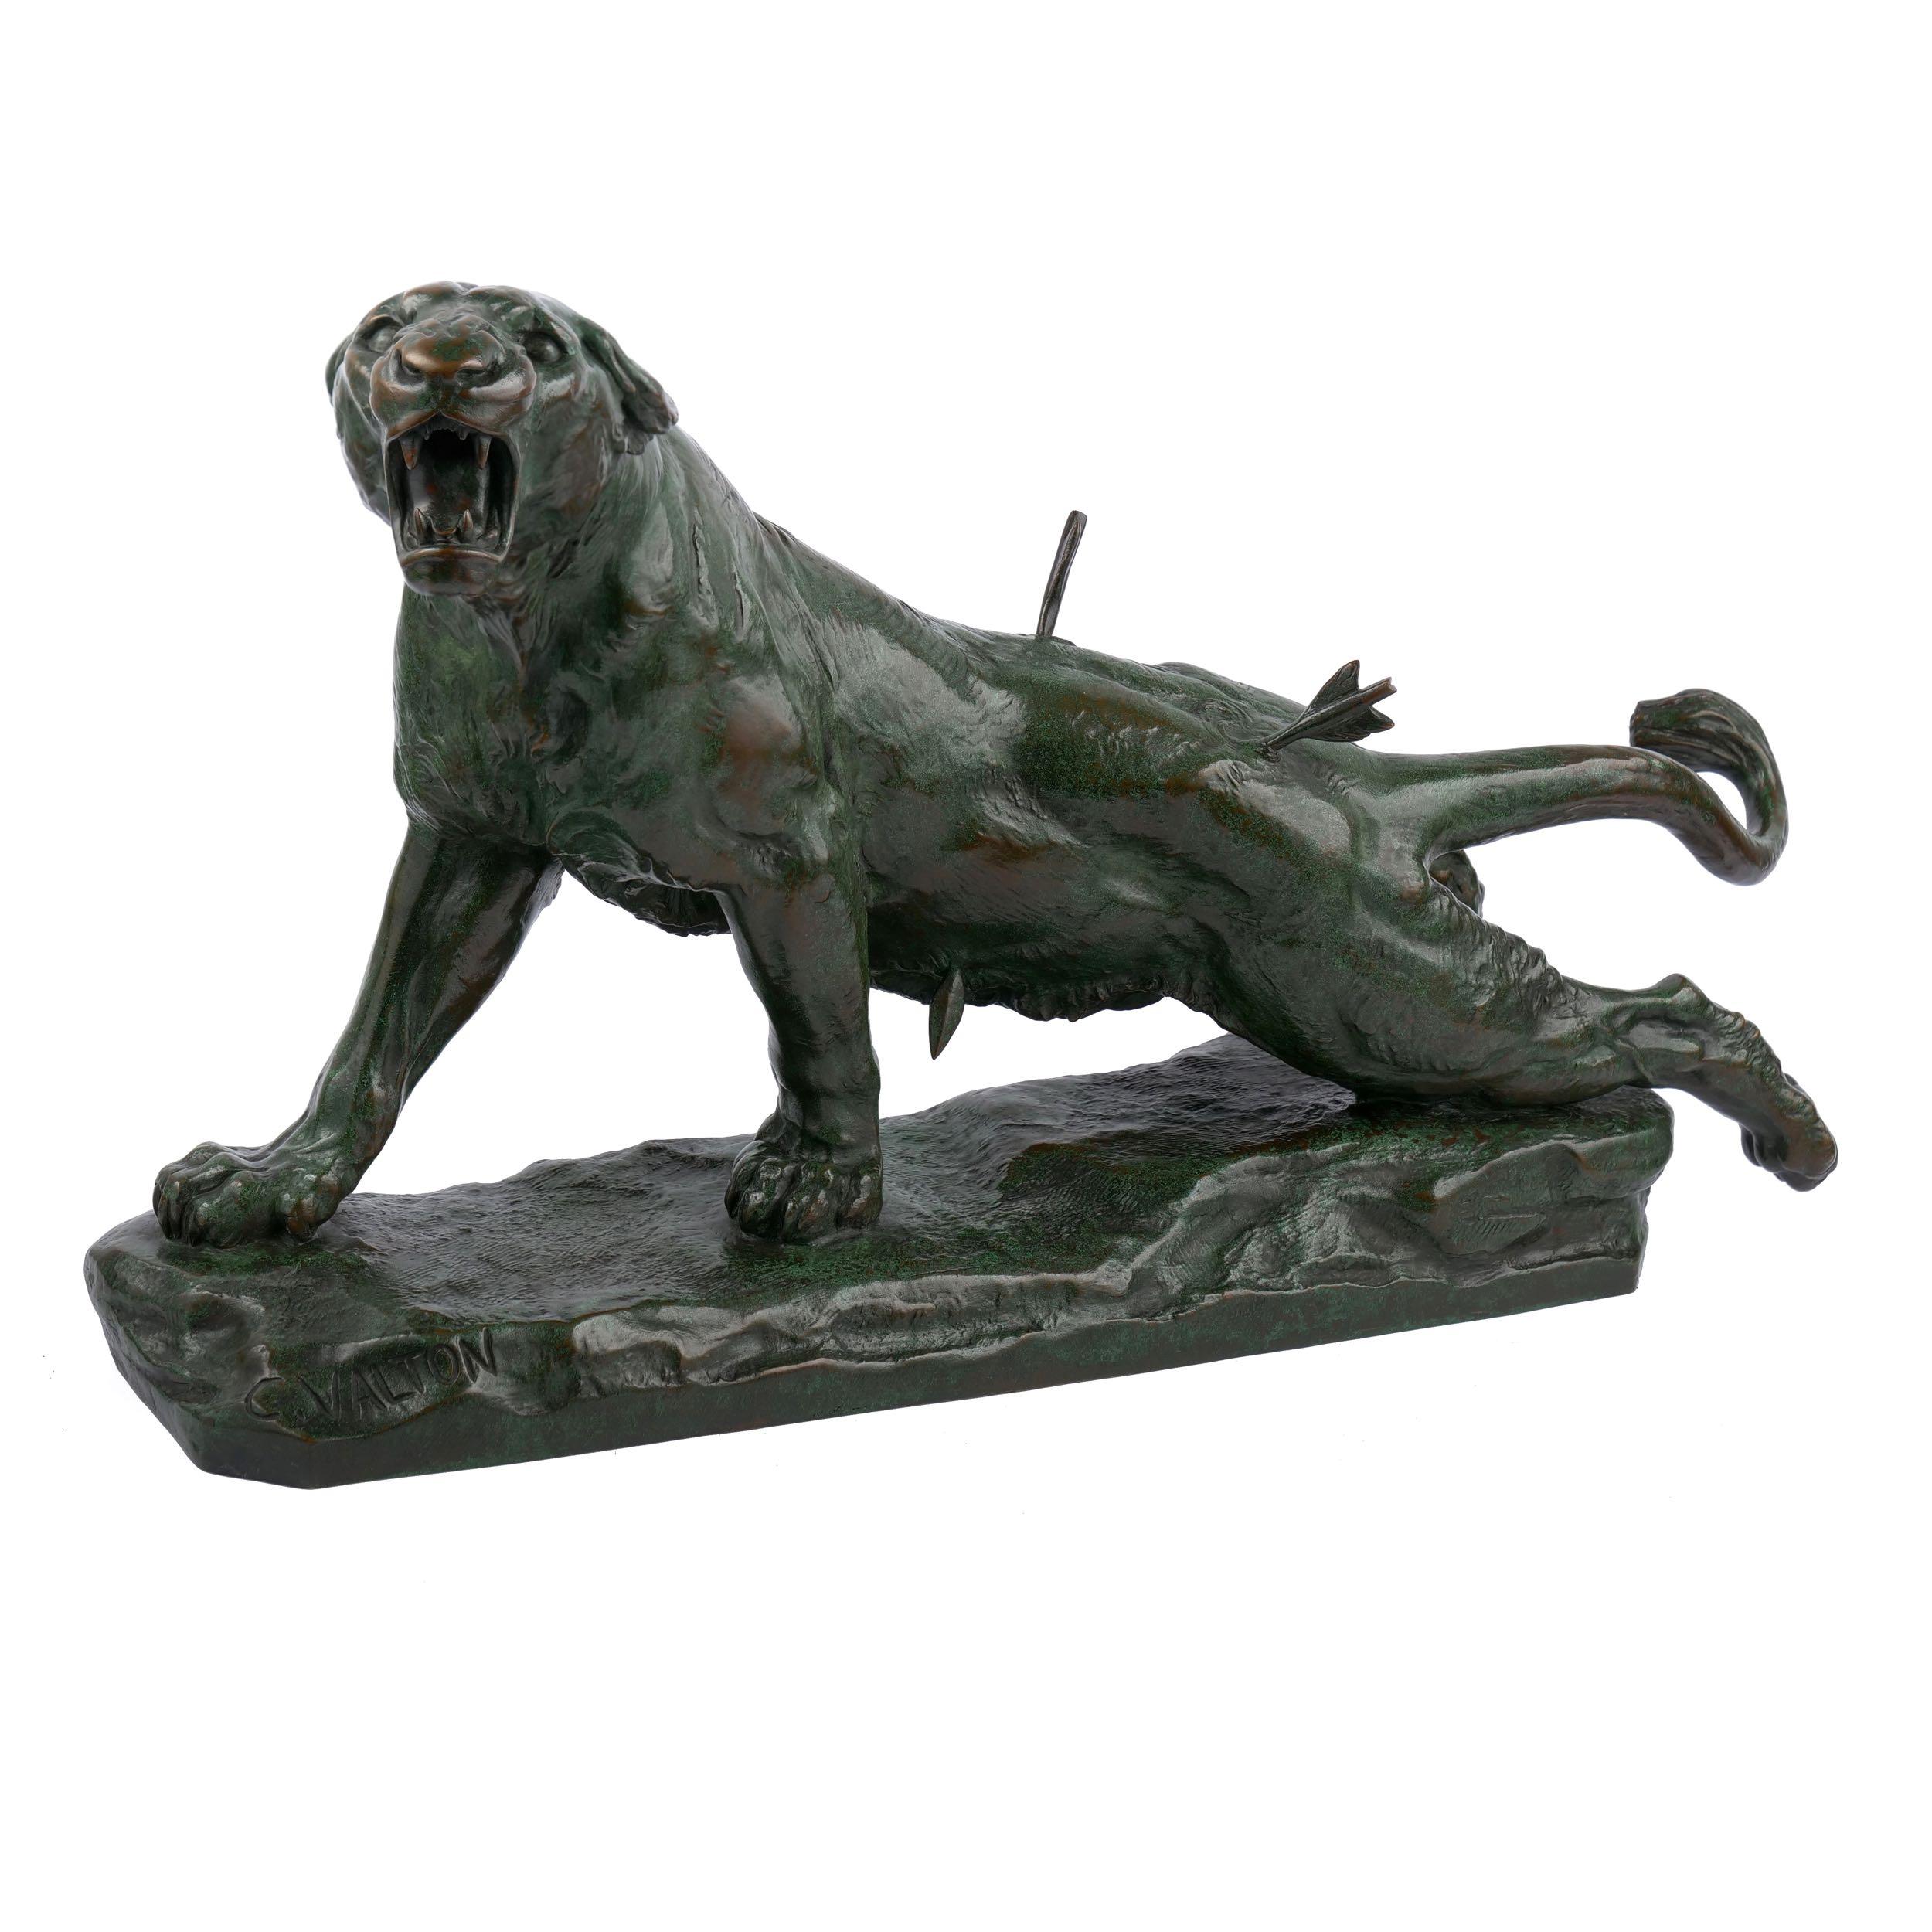 A superb lifetime cast of Charles Valton's “Lionne Blessée“ executed by the foundry Siot-Decauville during the first quarter of the 20th century, this extraordinary example is one of struggle and determination. A savage study, the model depicts a